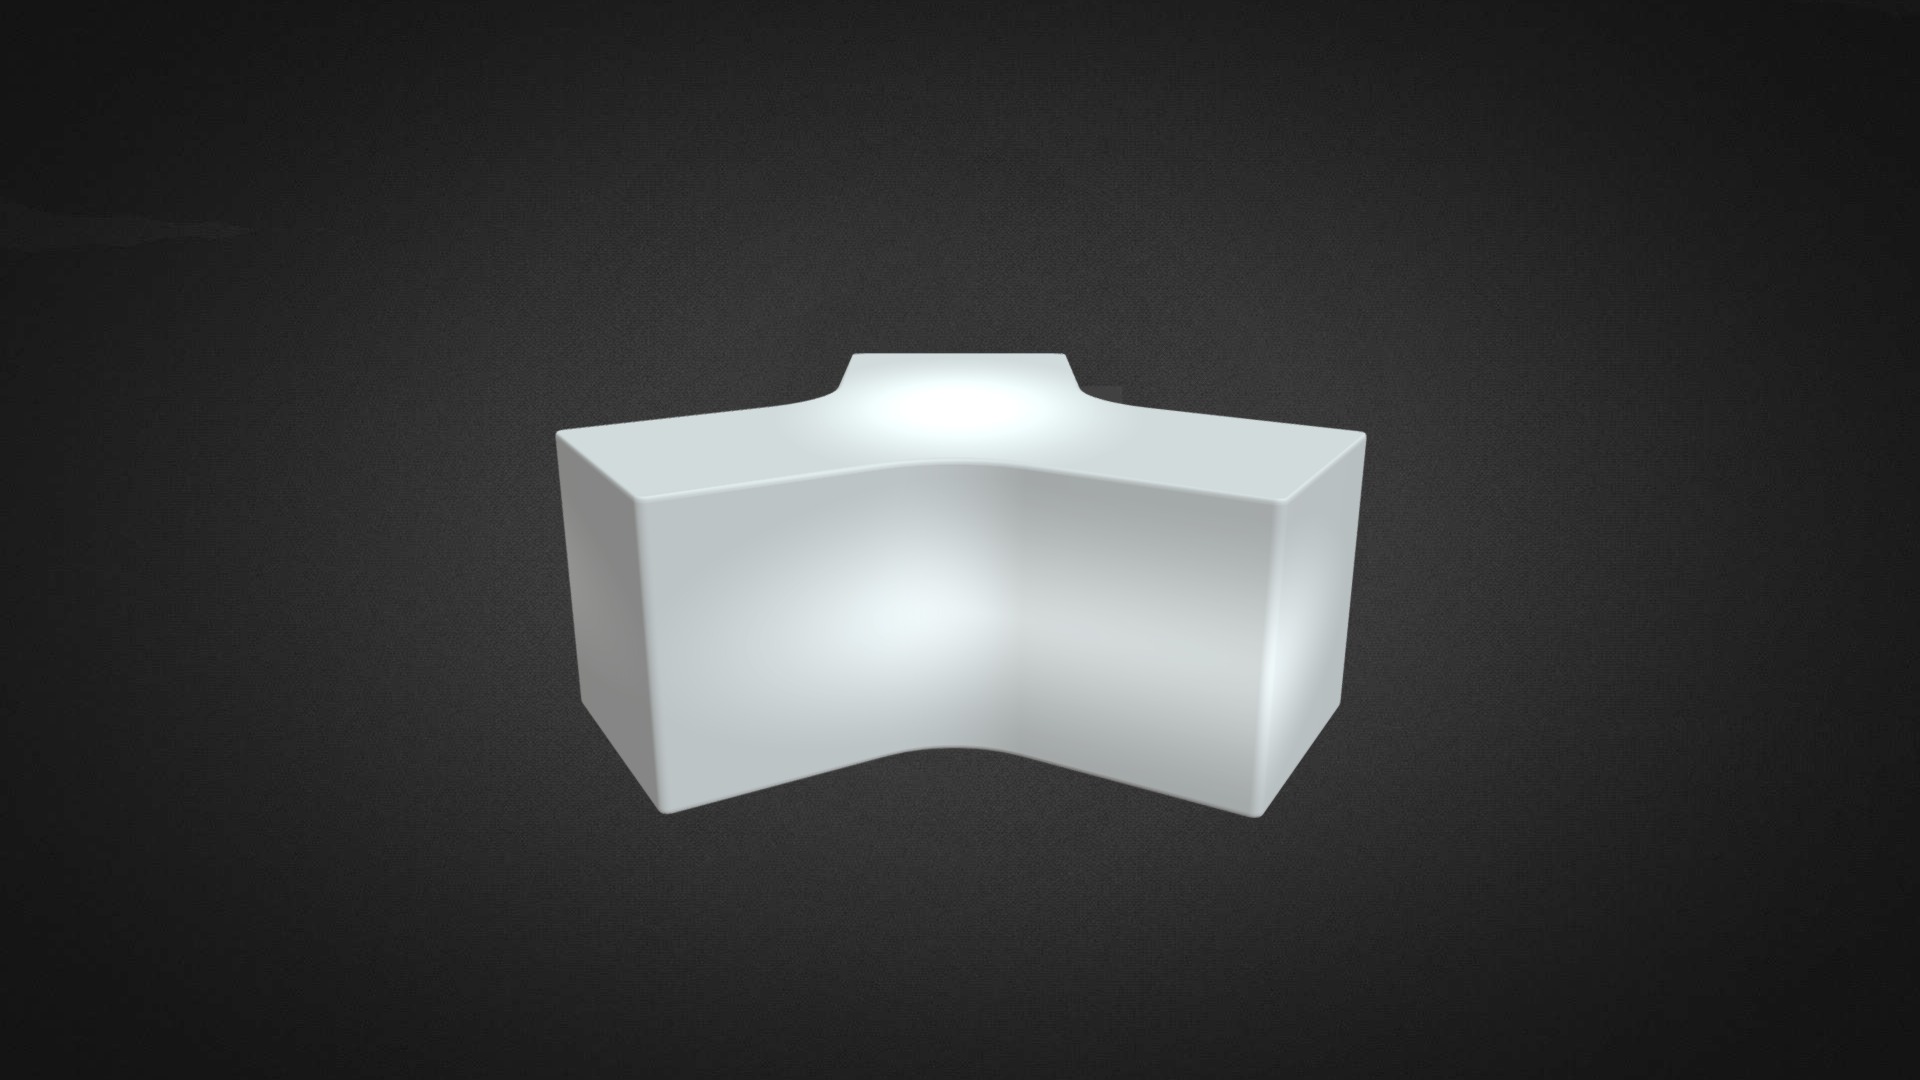 3D model Ypsilon LED Hire - This is a 3D model of the Ypsilon LED Hire. The 3D model is about a white square object.